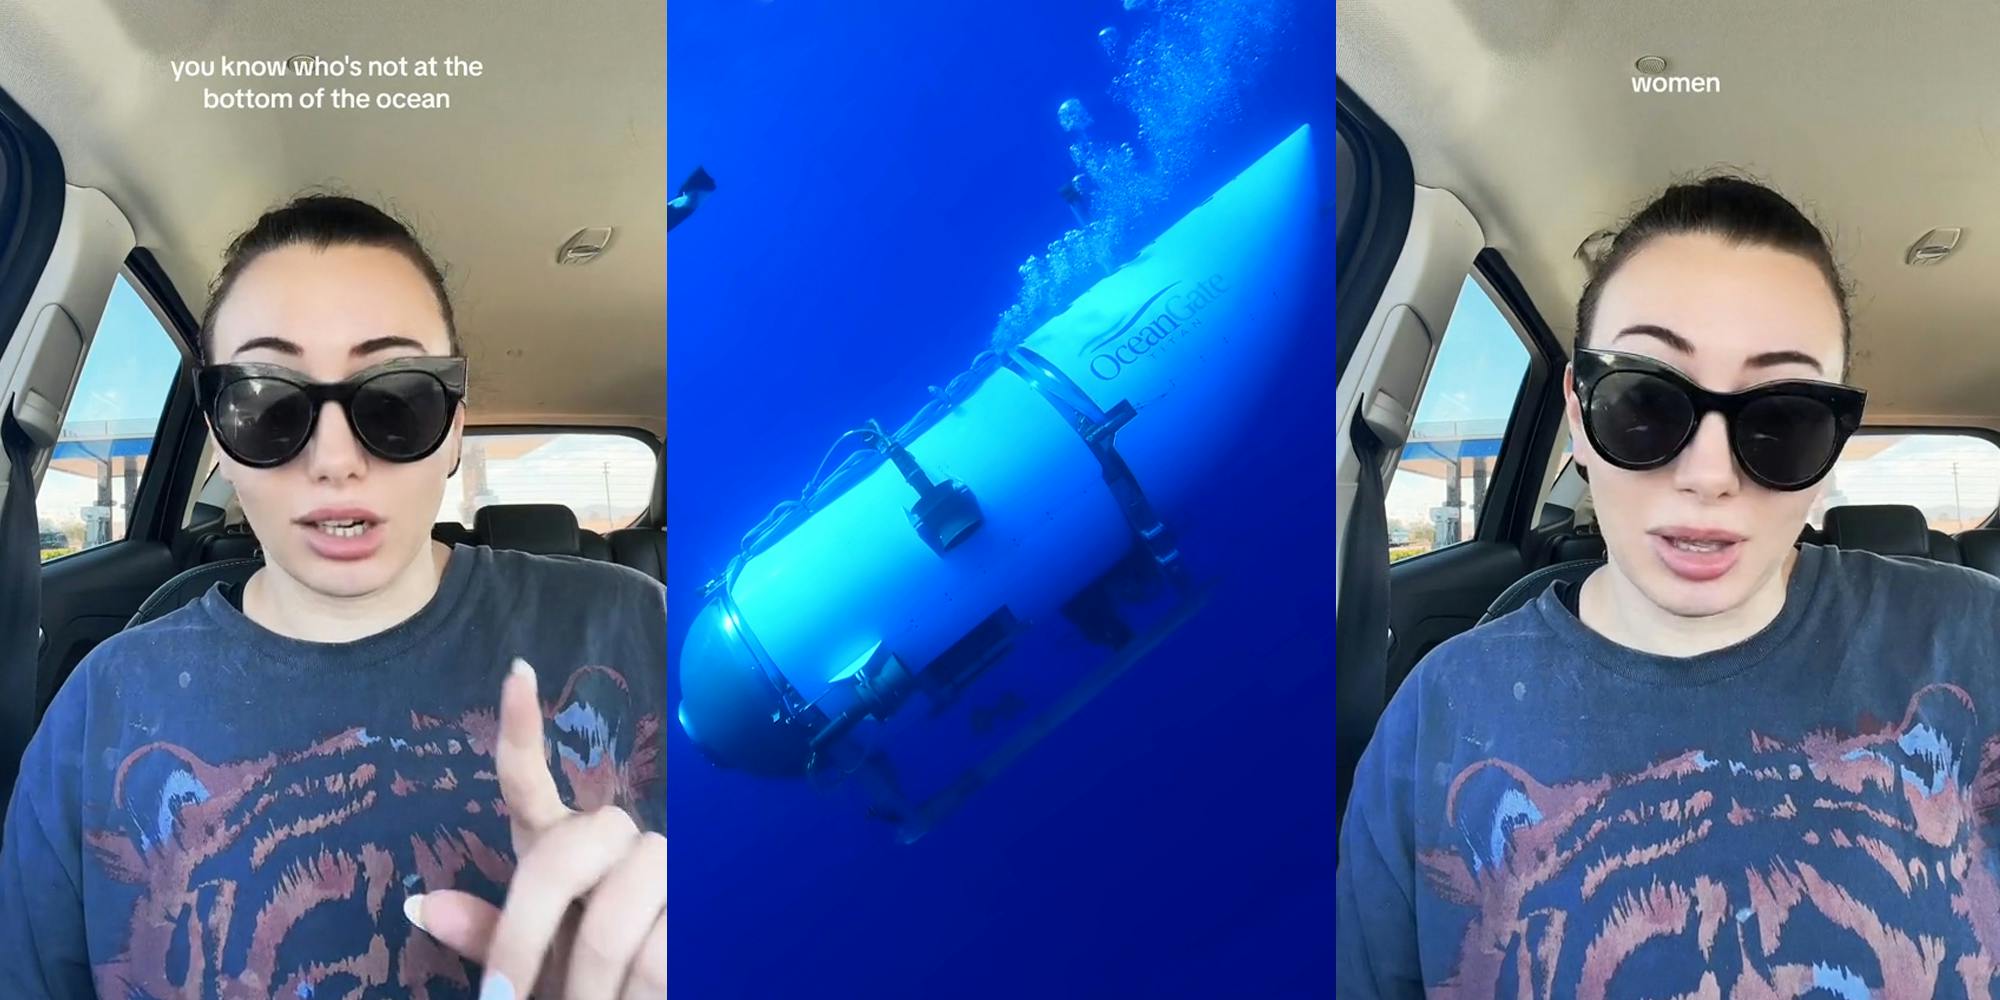 woman speaking in car with caption "you know who's not ta the bottom of the ocean?" (l) OceanGate Titan submarine underwater (c) woman speaking in car with caption "women" (r)